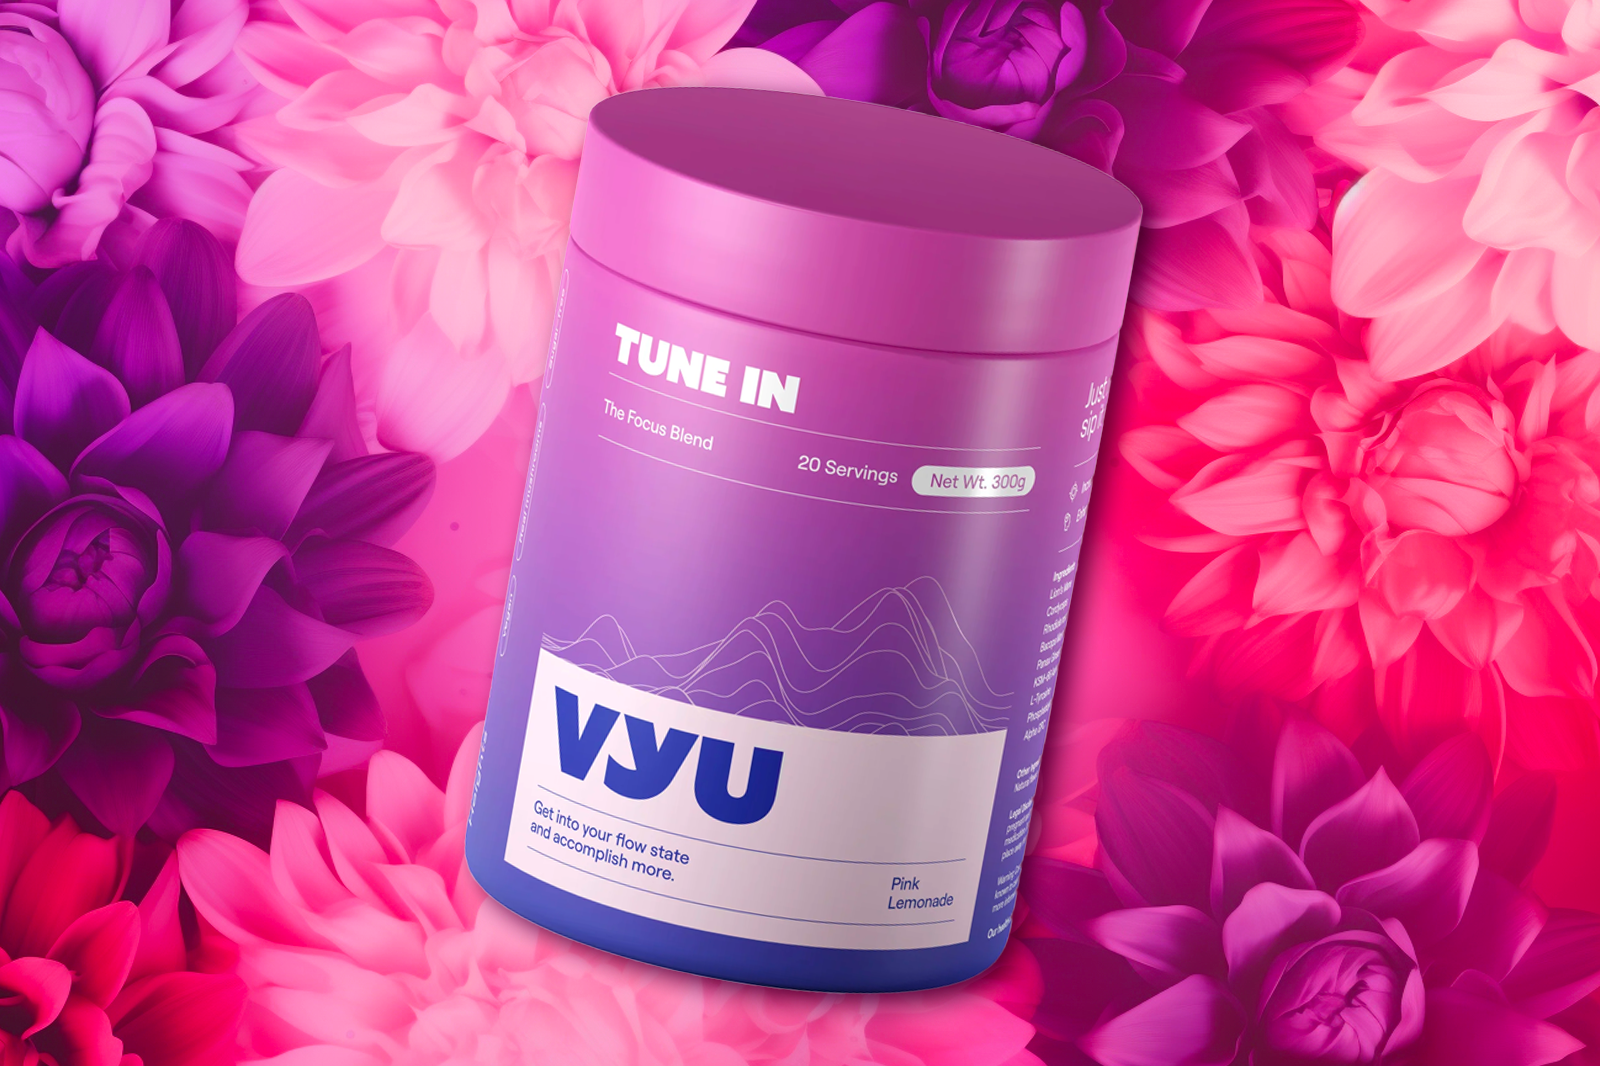 A container of VYU TUNE IN with Pink Lemonade flavor is placed against a multicolored flower background